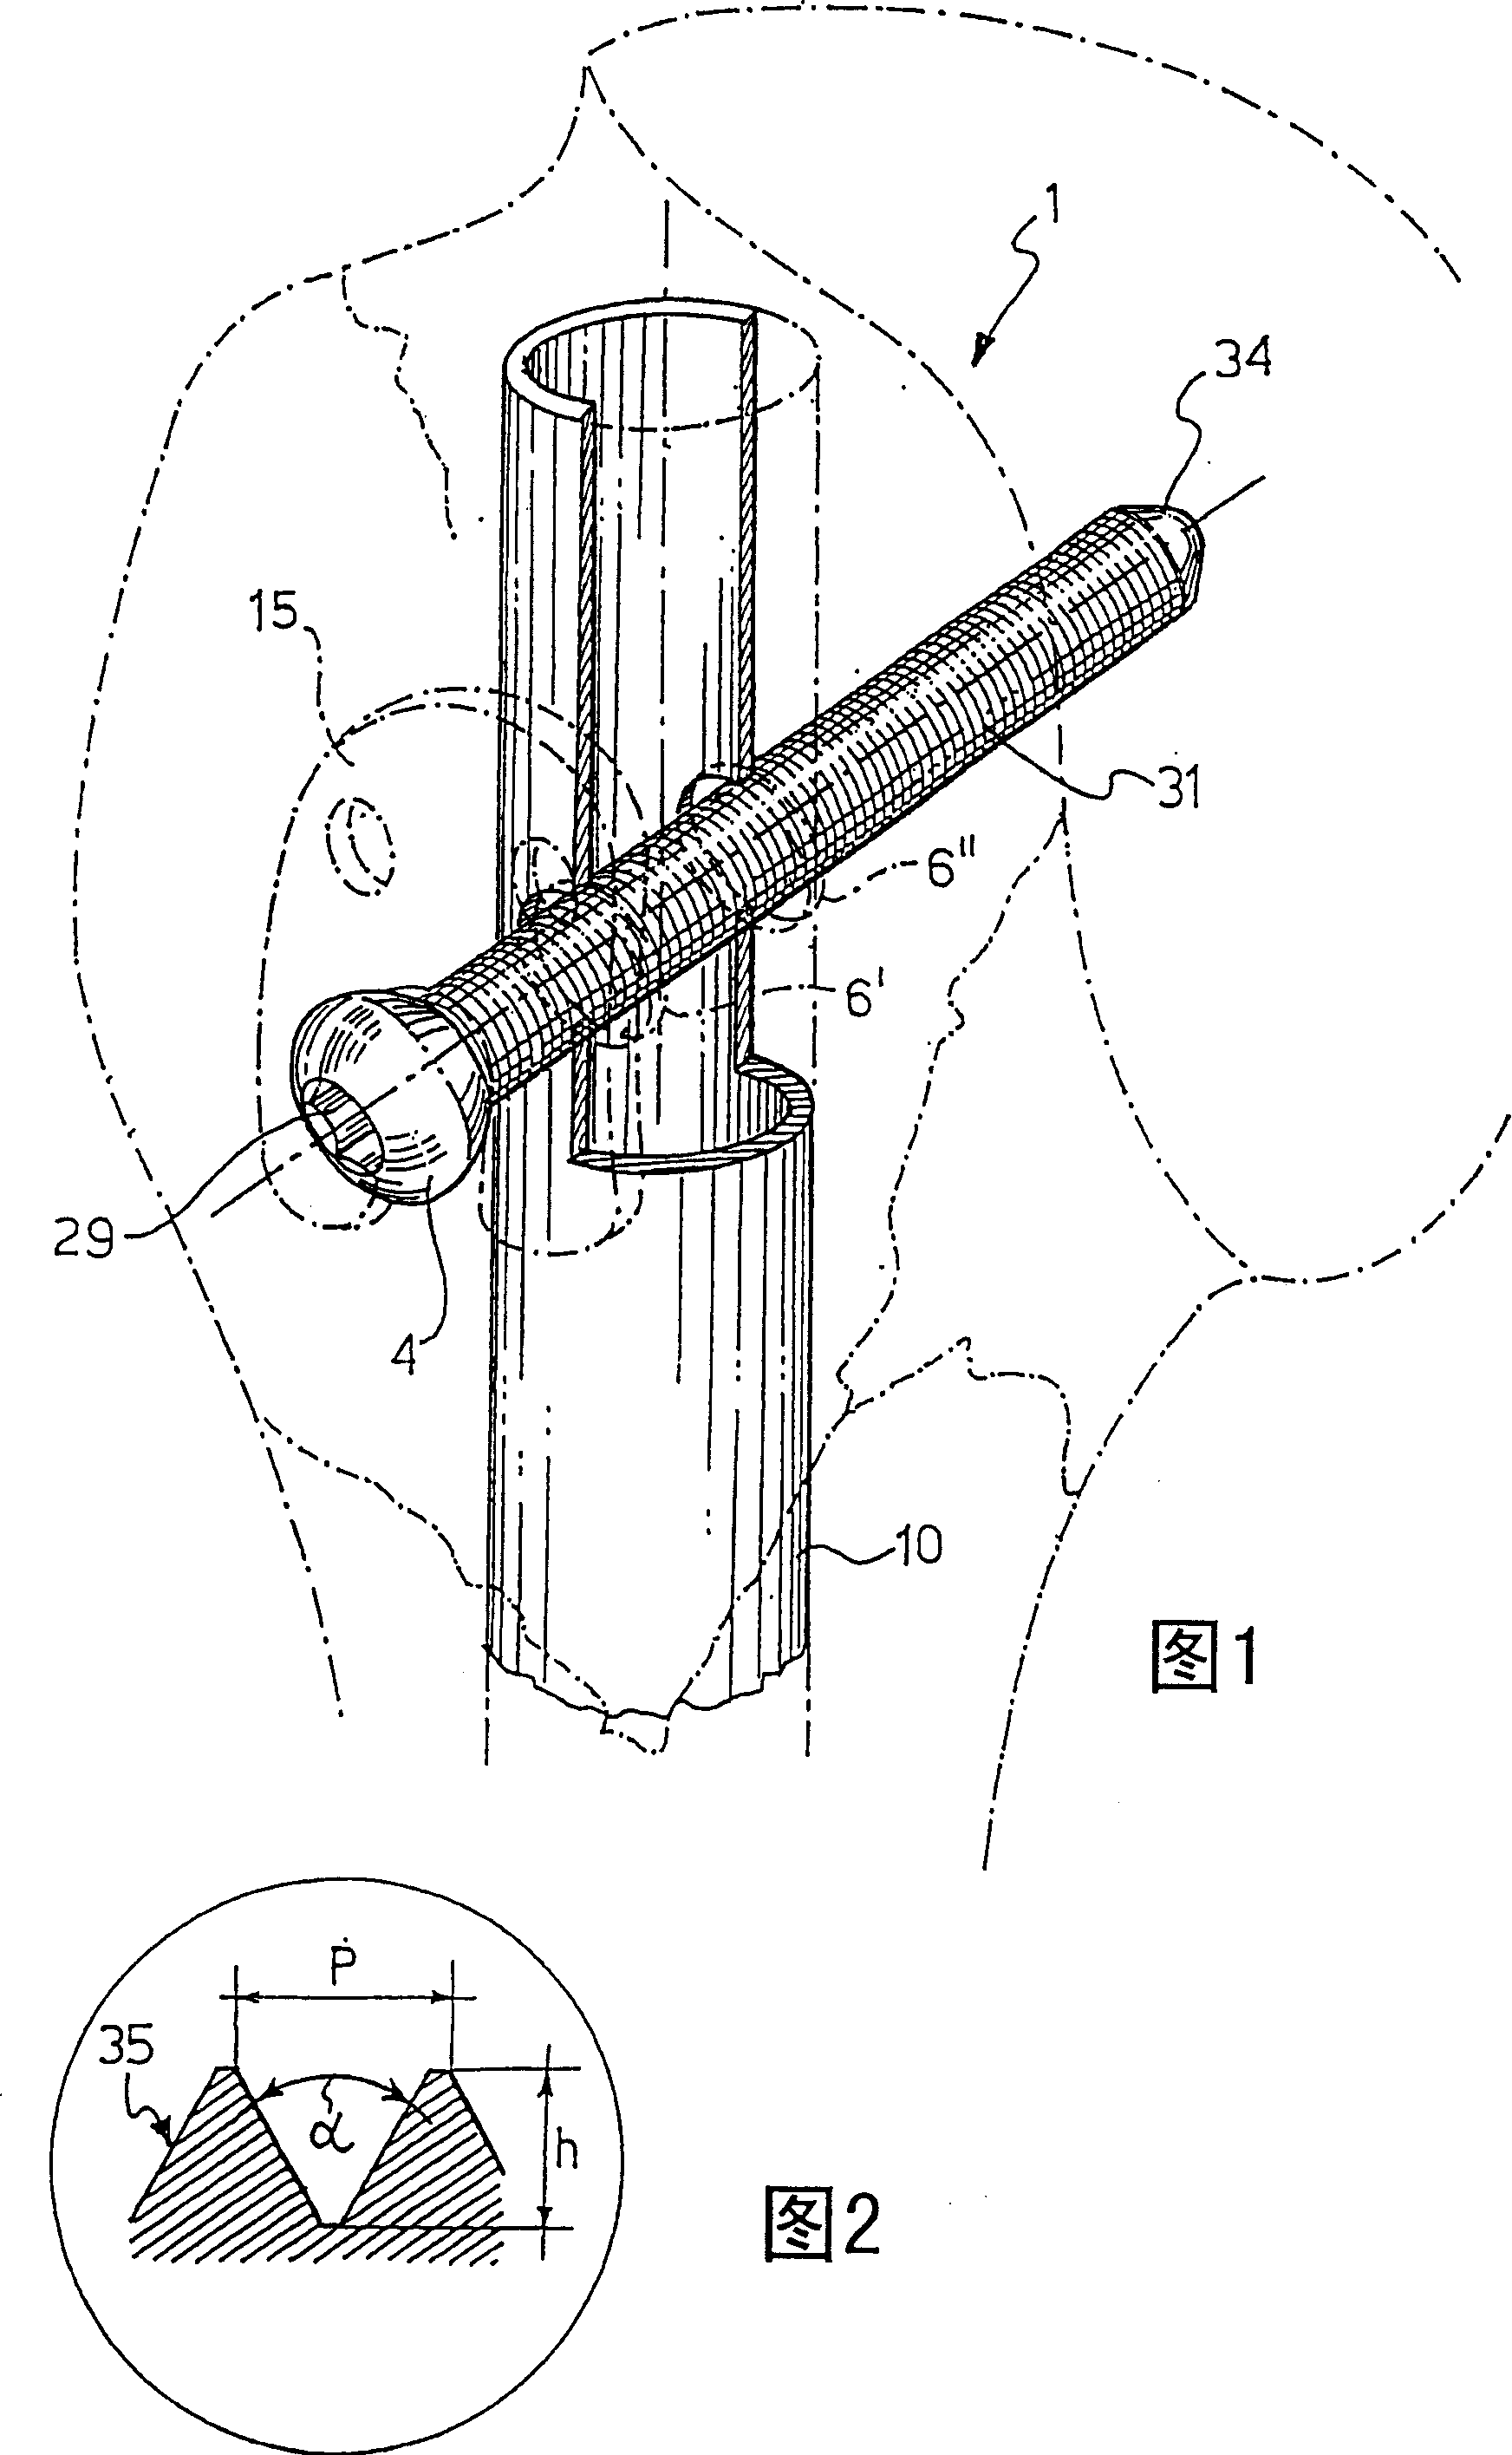 Nail and screw fixation system for improving the fixation of proximal fractures of the humerus